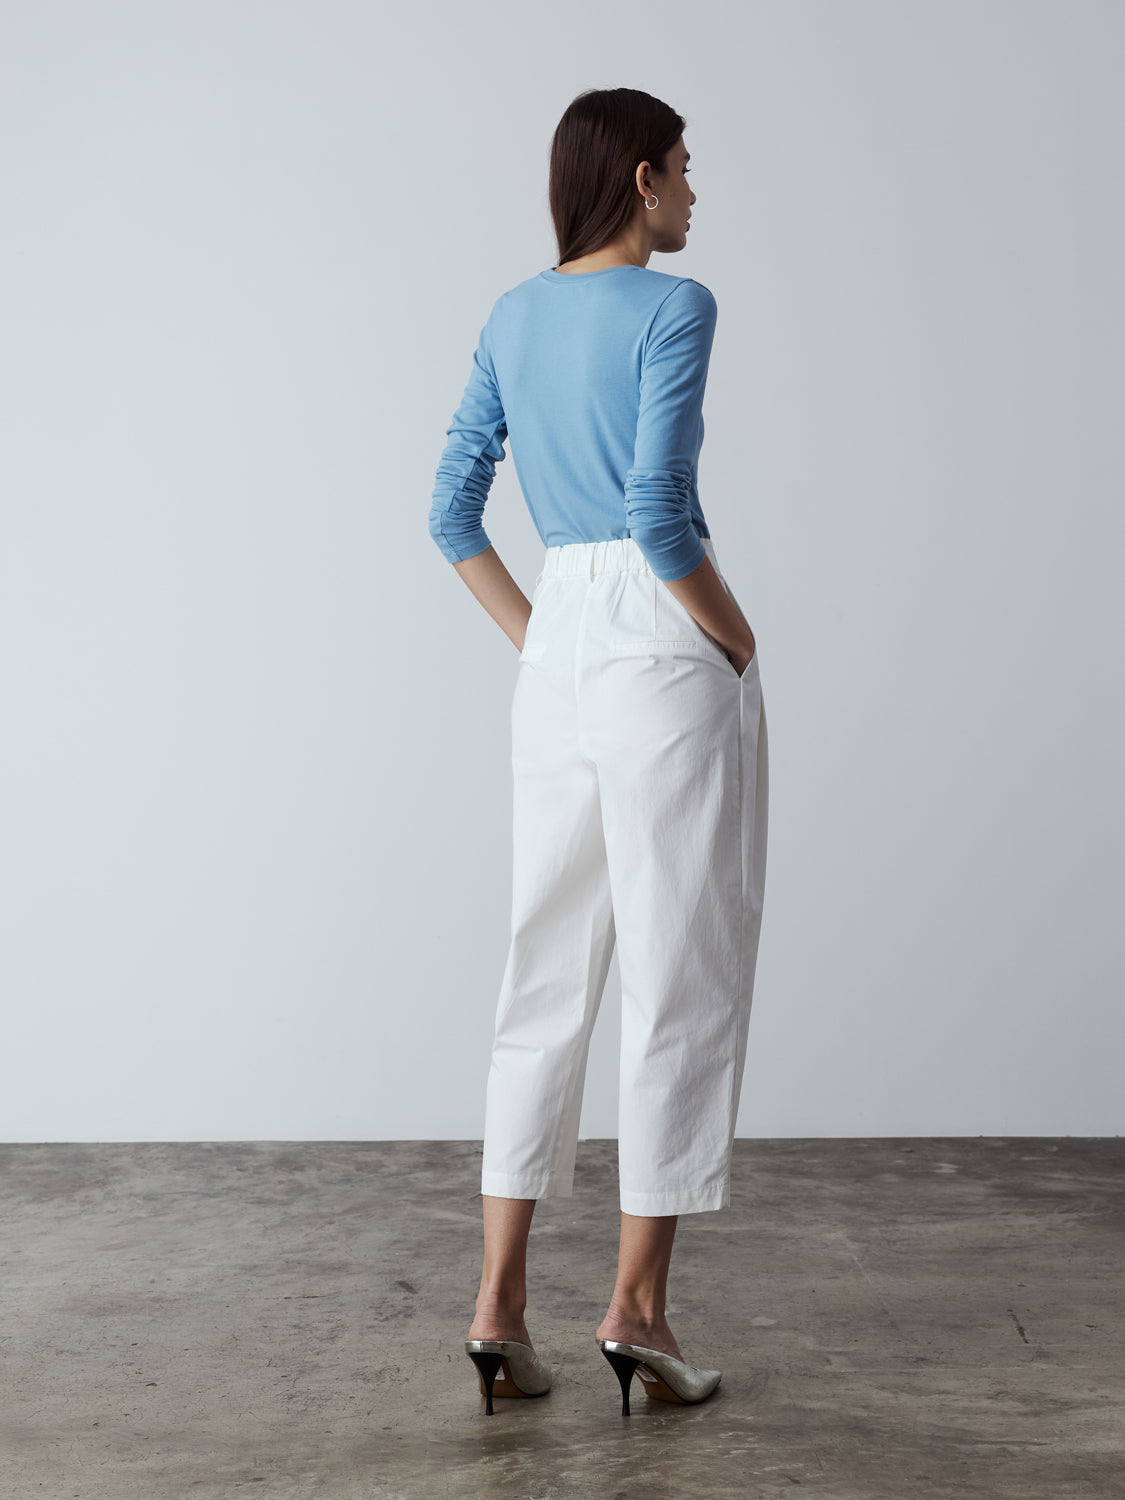 white : Model is wearing the Cotton Tailored Trousers in White, which comes high-waisted with slash pockets at the sides, a concealed zip-fly closure and pleated details. Worn with the Fitted Long Sleeve T-Shirt in Blue and metallic silver heels.